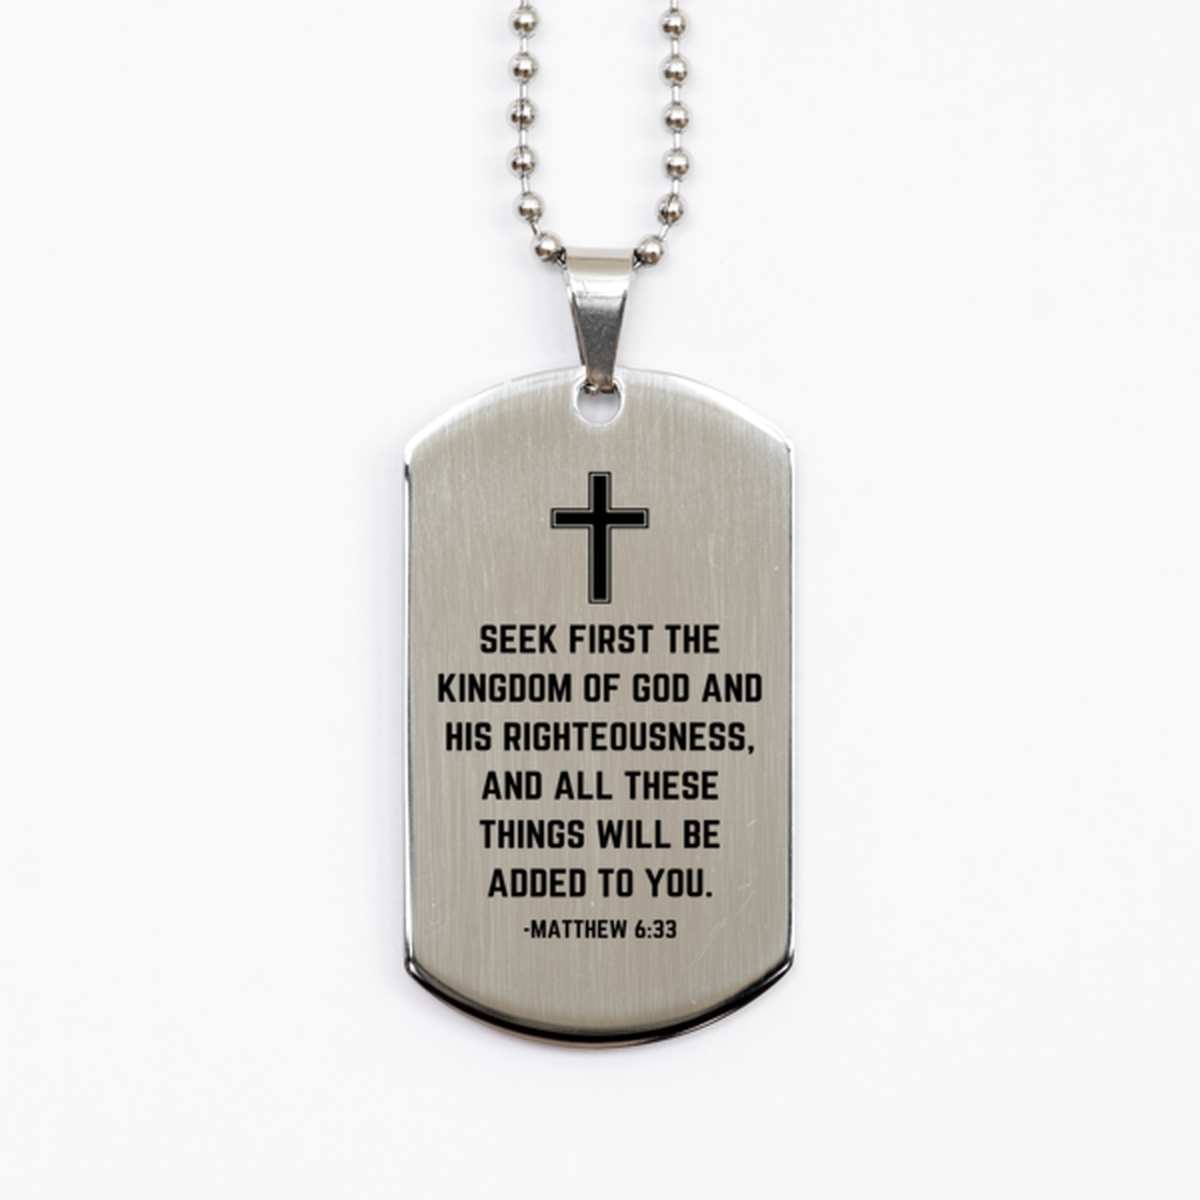 Baptism Gifts For Teenage Boys Girls, Christian Bible Verse Silver Dog Tag, Seek first the kingdom of God, Confirmation Gifts, Bible Verse Necklace for Son, Godson, Grandson, Nephew